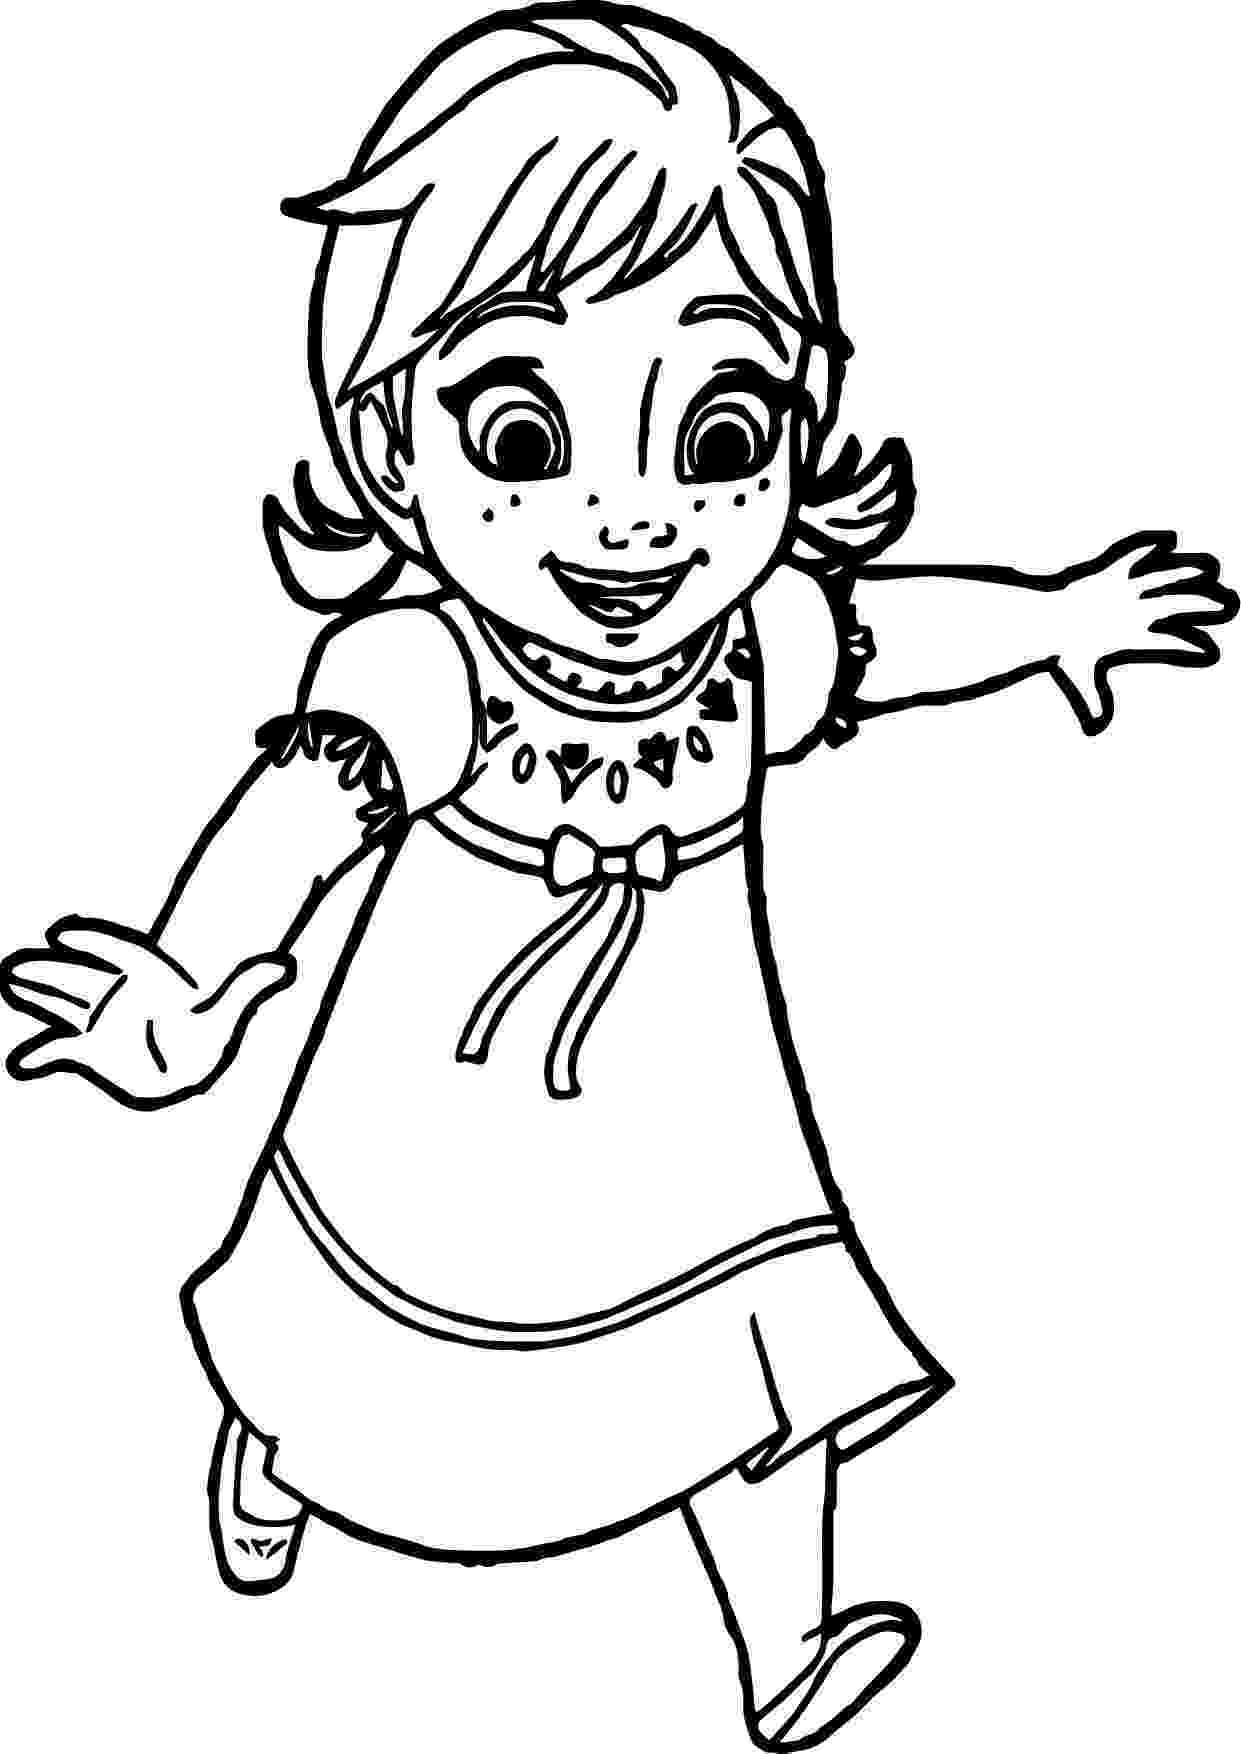 anna from frozen coloring pages frozen elsa and anna coloring pages getcoloringpagescom from frozen pages coloring anna 